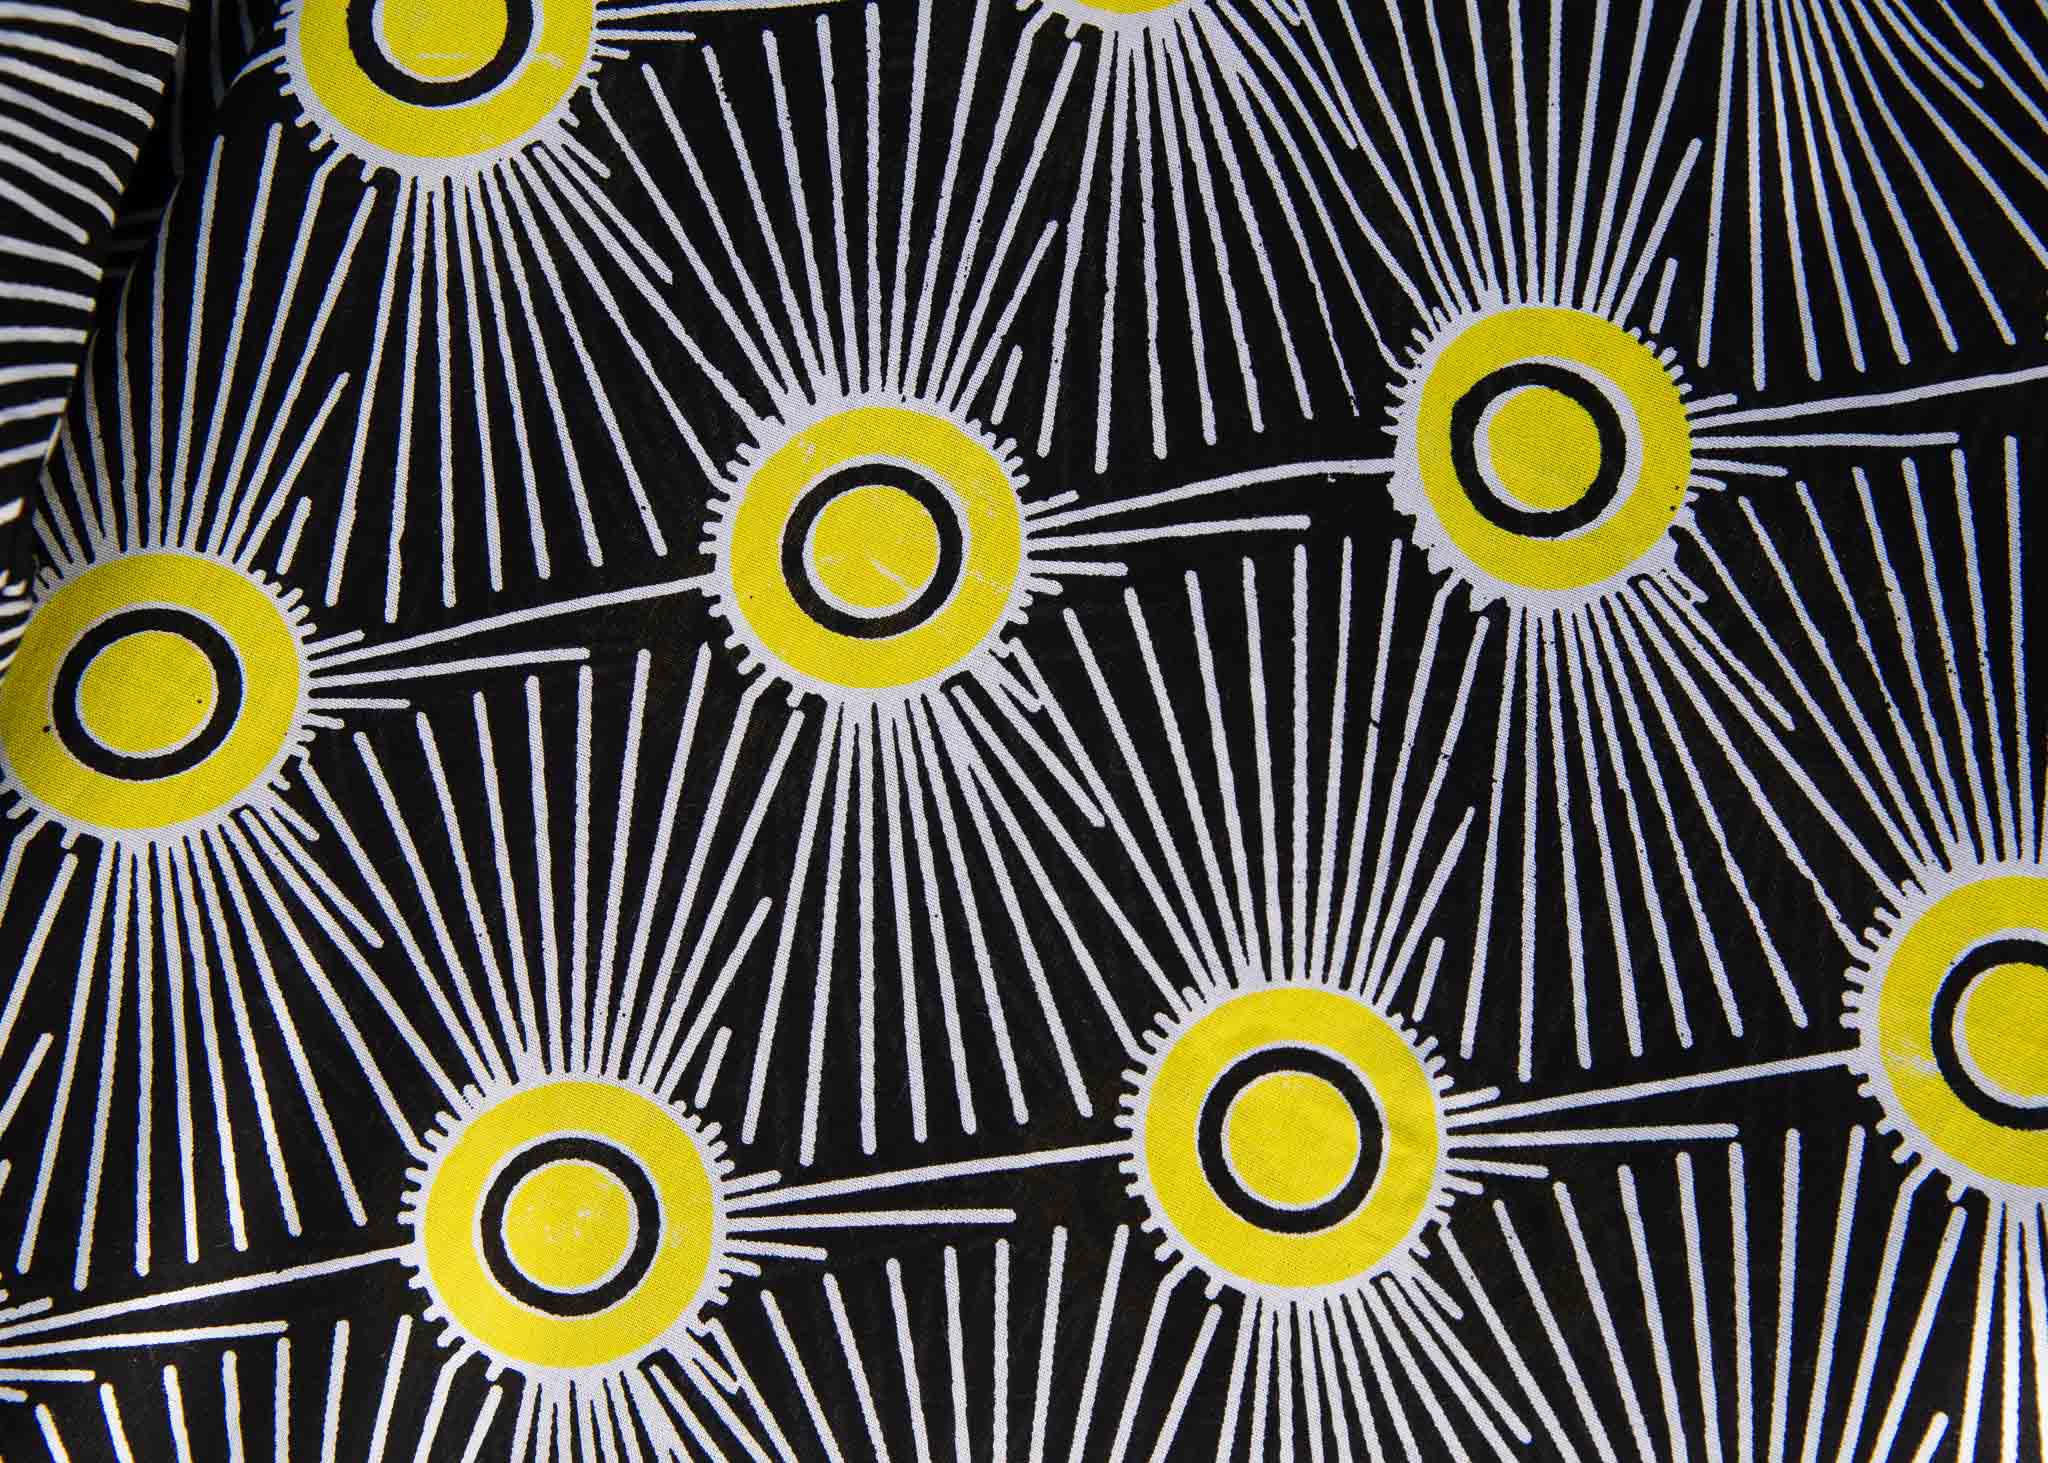 Display of black and white dress with yellow burst print.